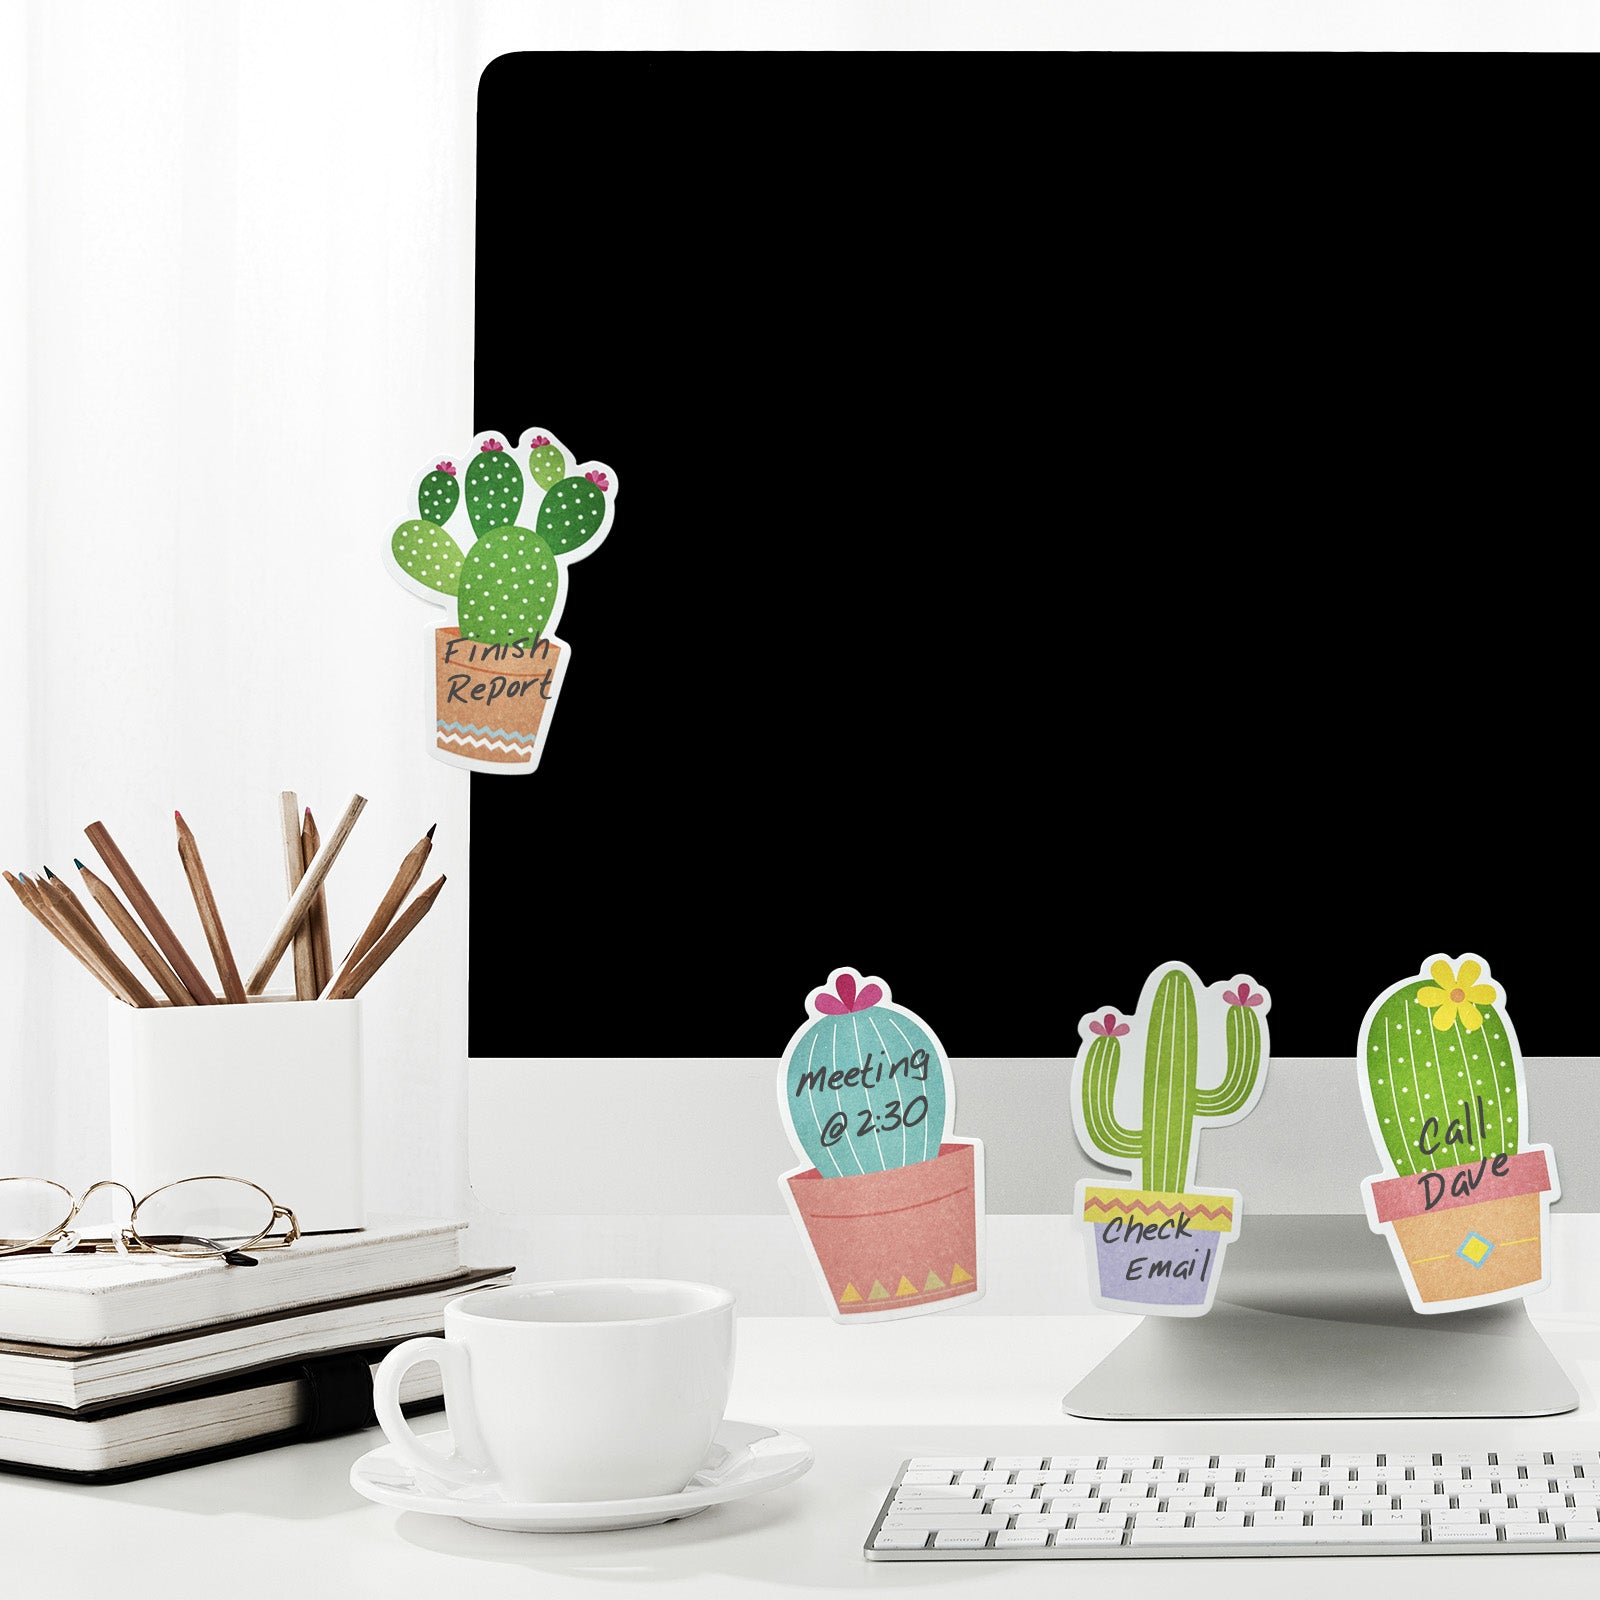 Wrapables Cute Cactus Succulents Sticky Notes, Adhesive Memo Notepads for Home, Office, Work (Set of 6)